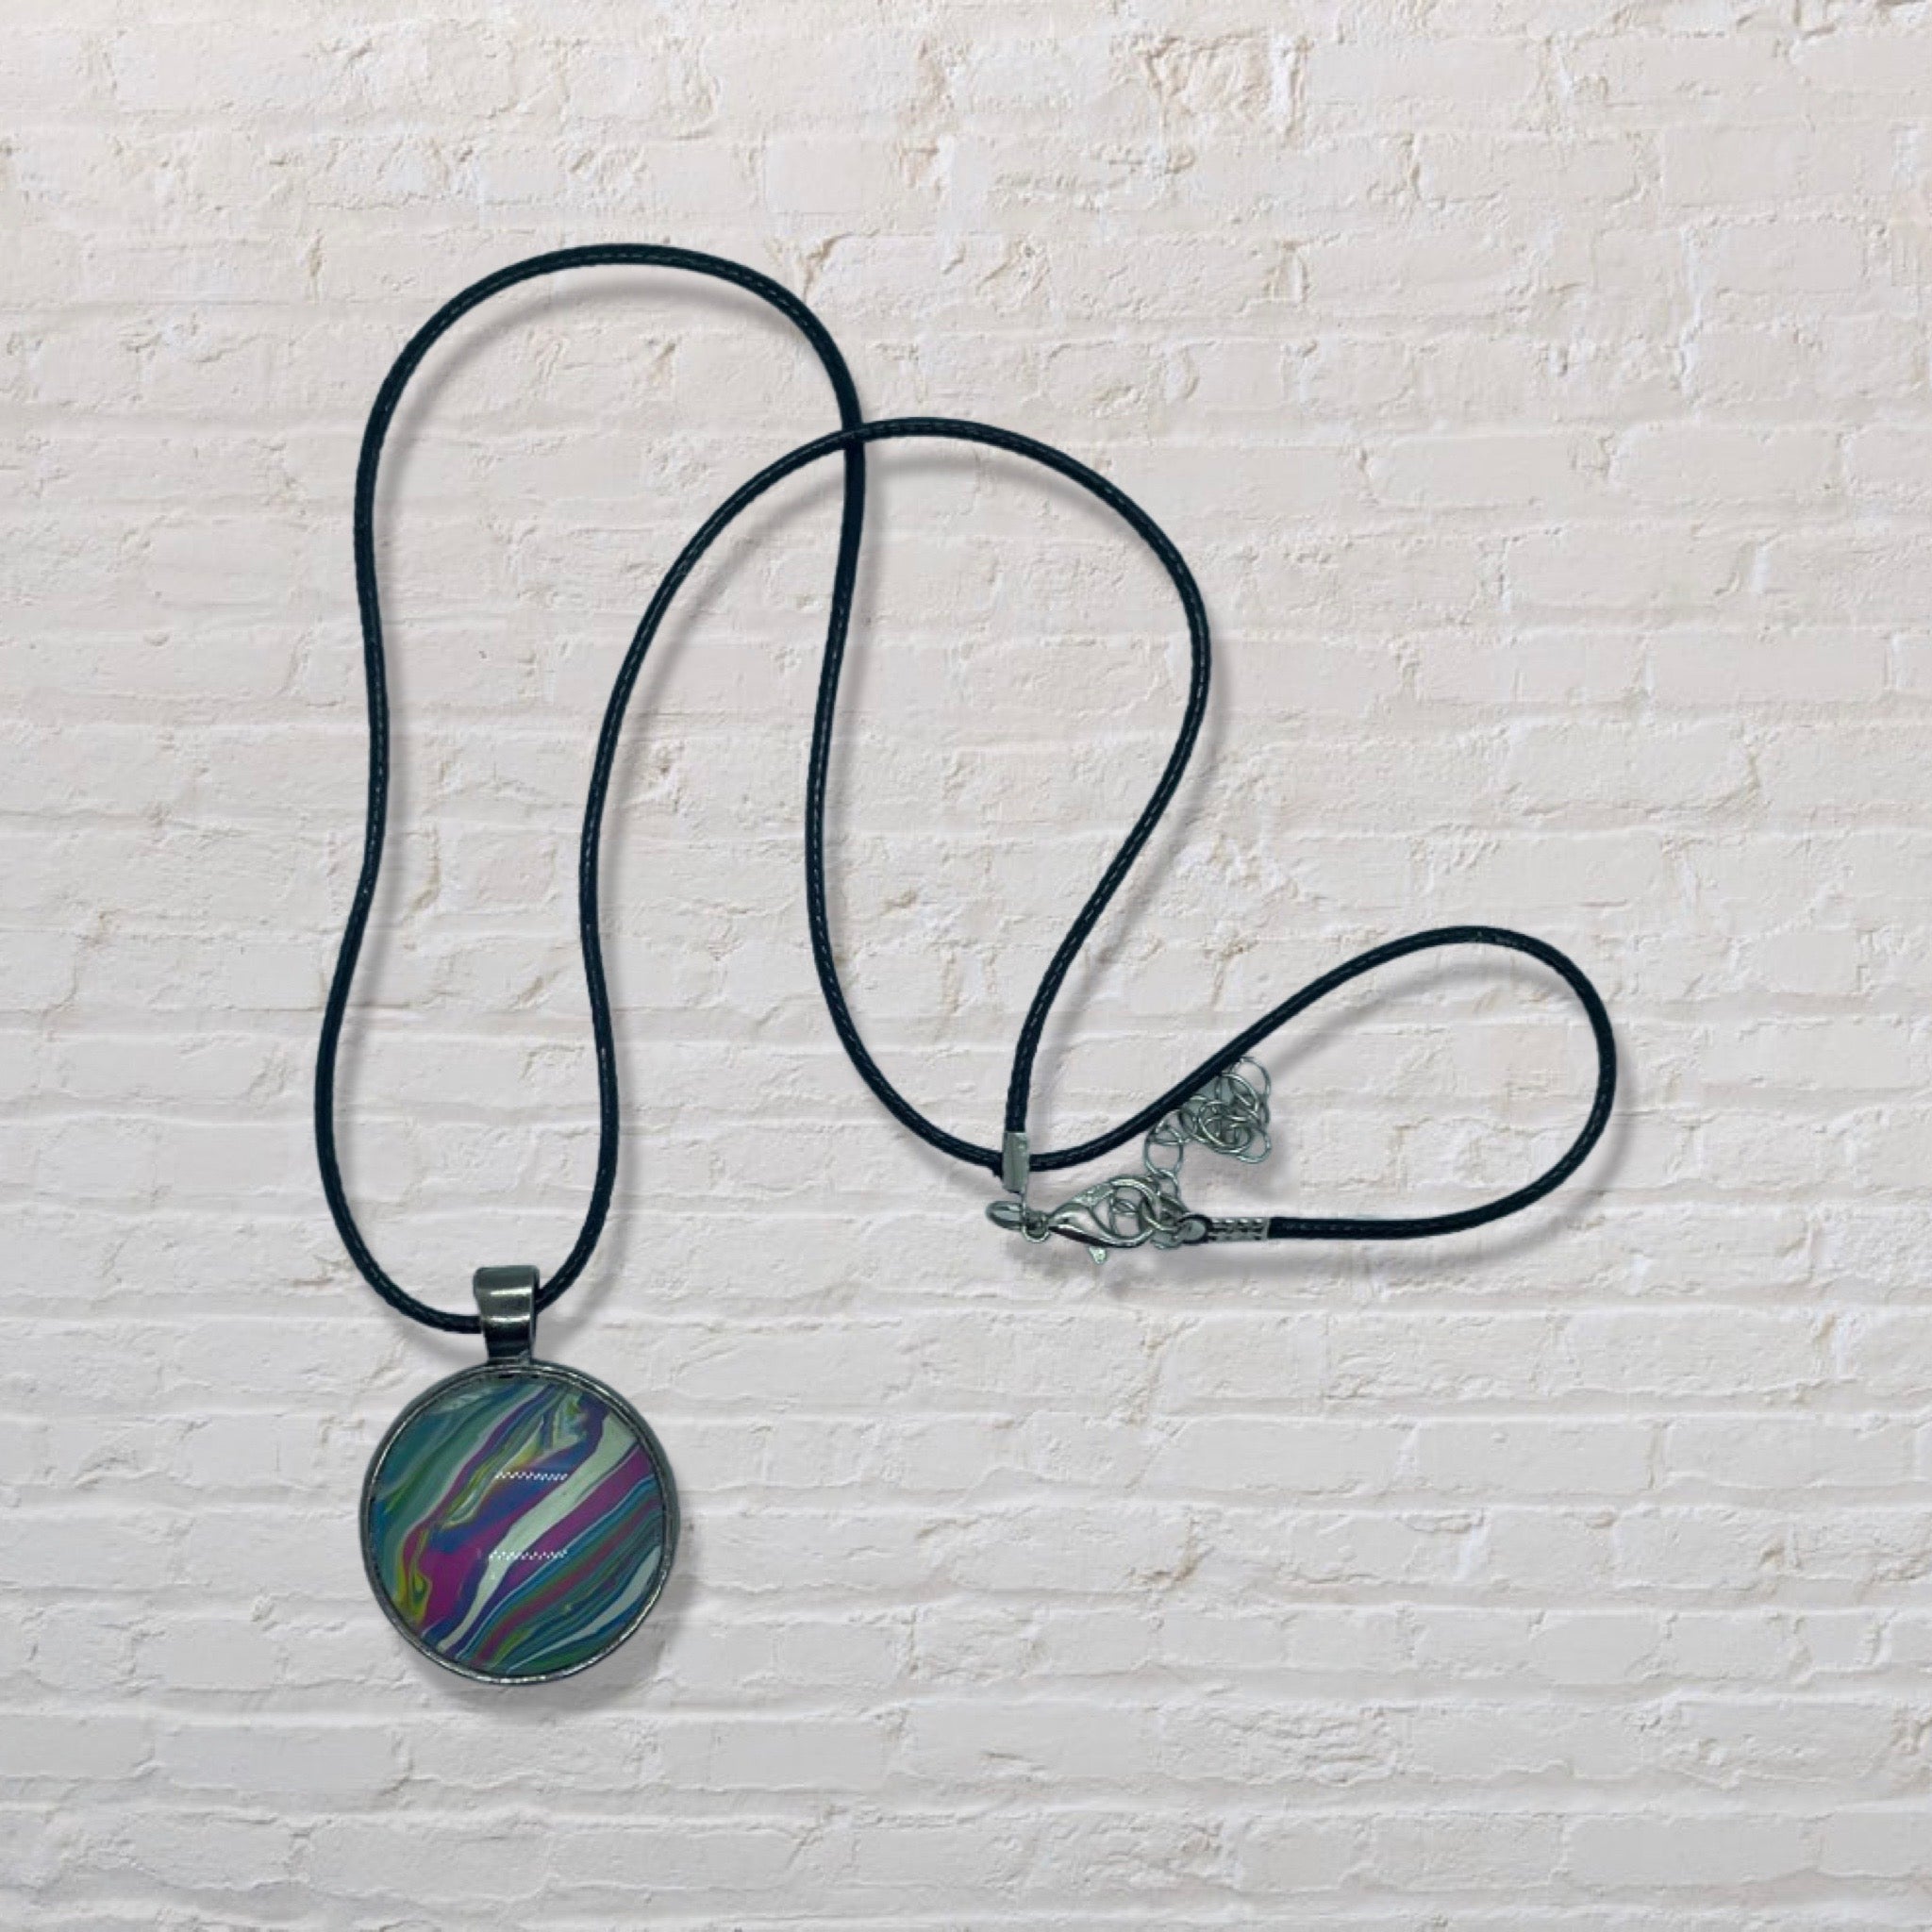 By The Kids -- Paint Pour Necklace - Pink, Blue, White and Green